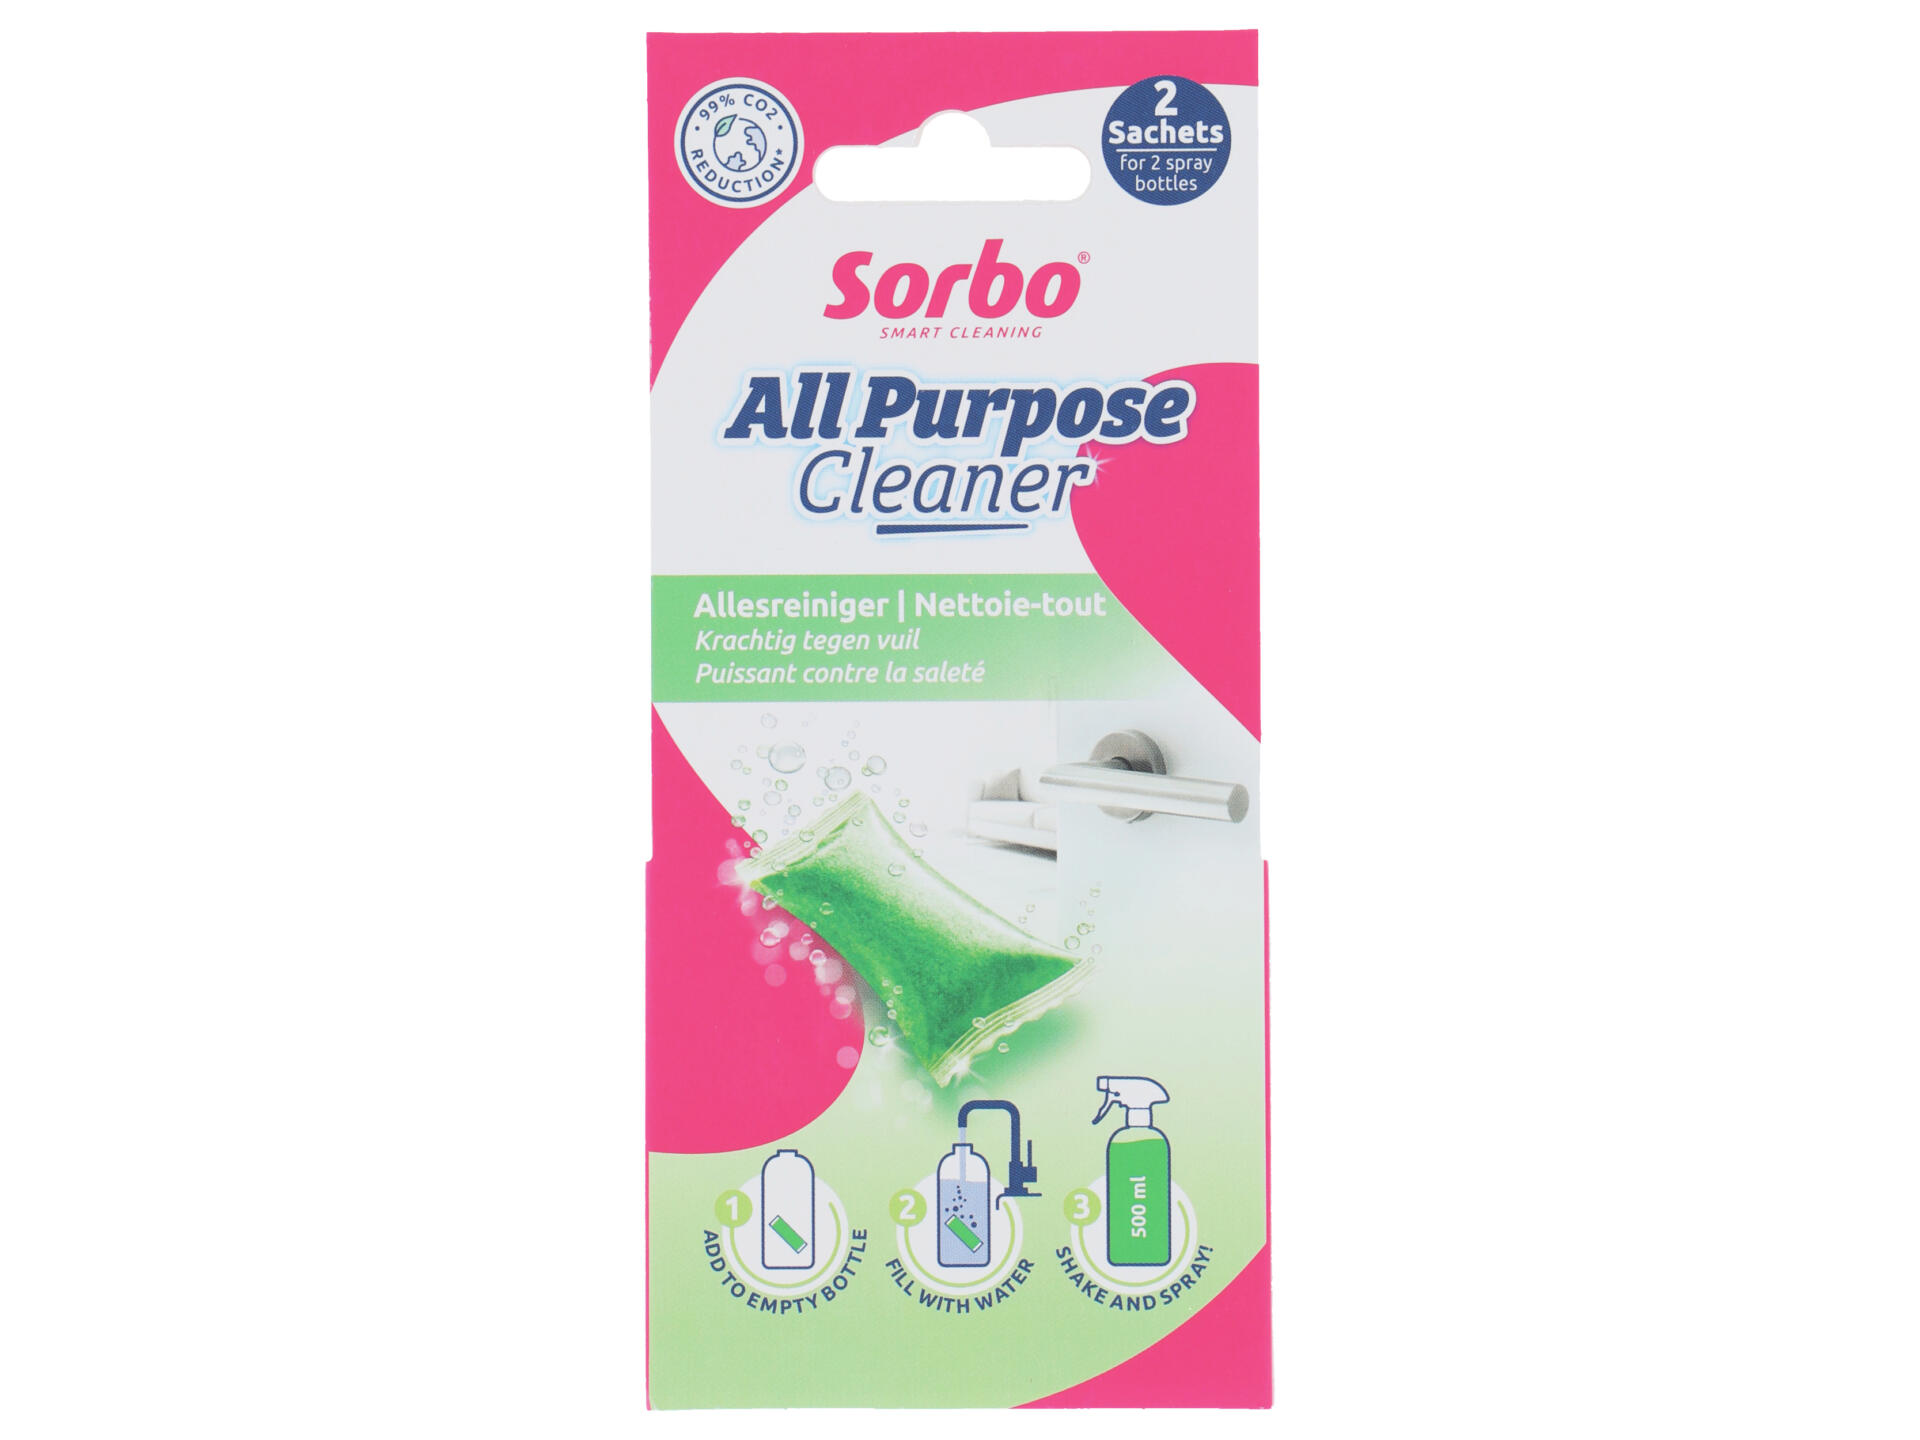 All Purpose Cleaner nettoyant multi-usage 2 pièces